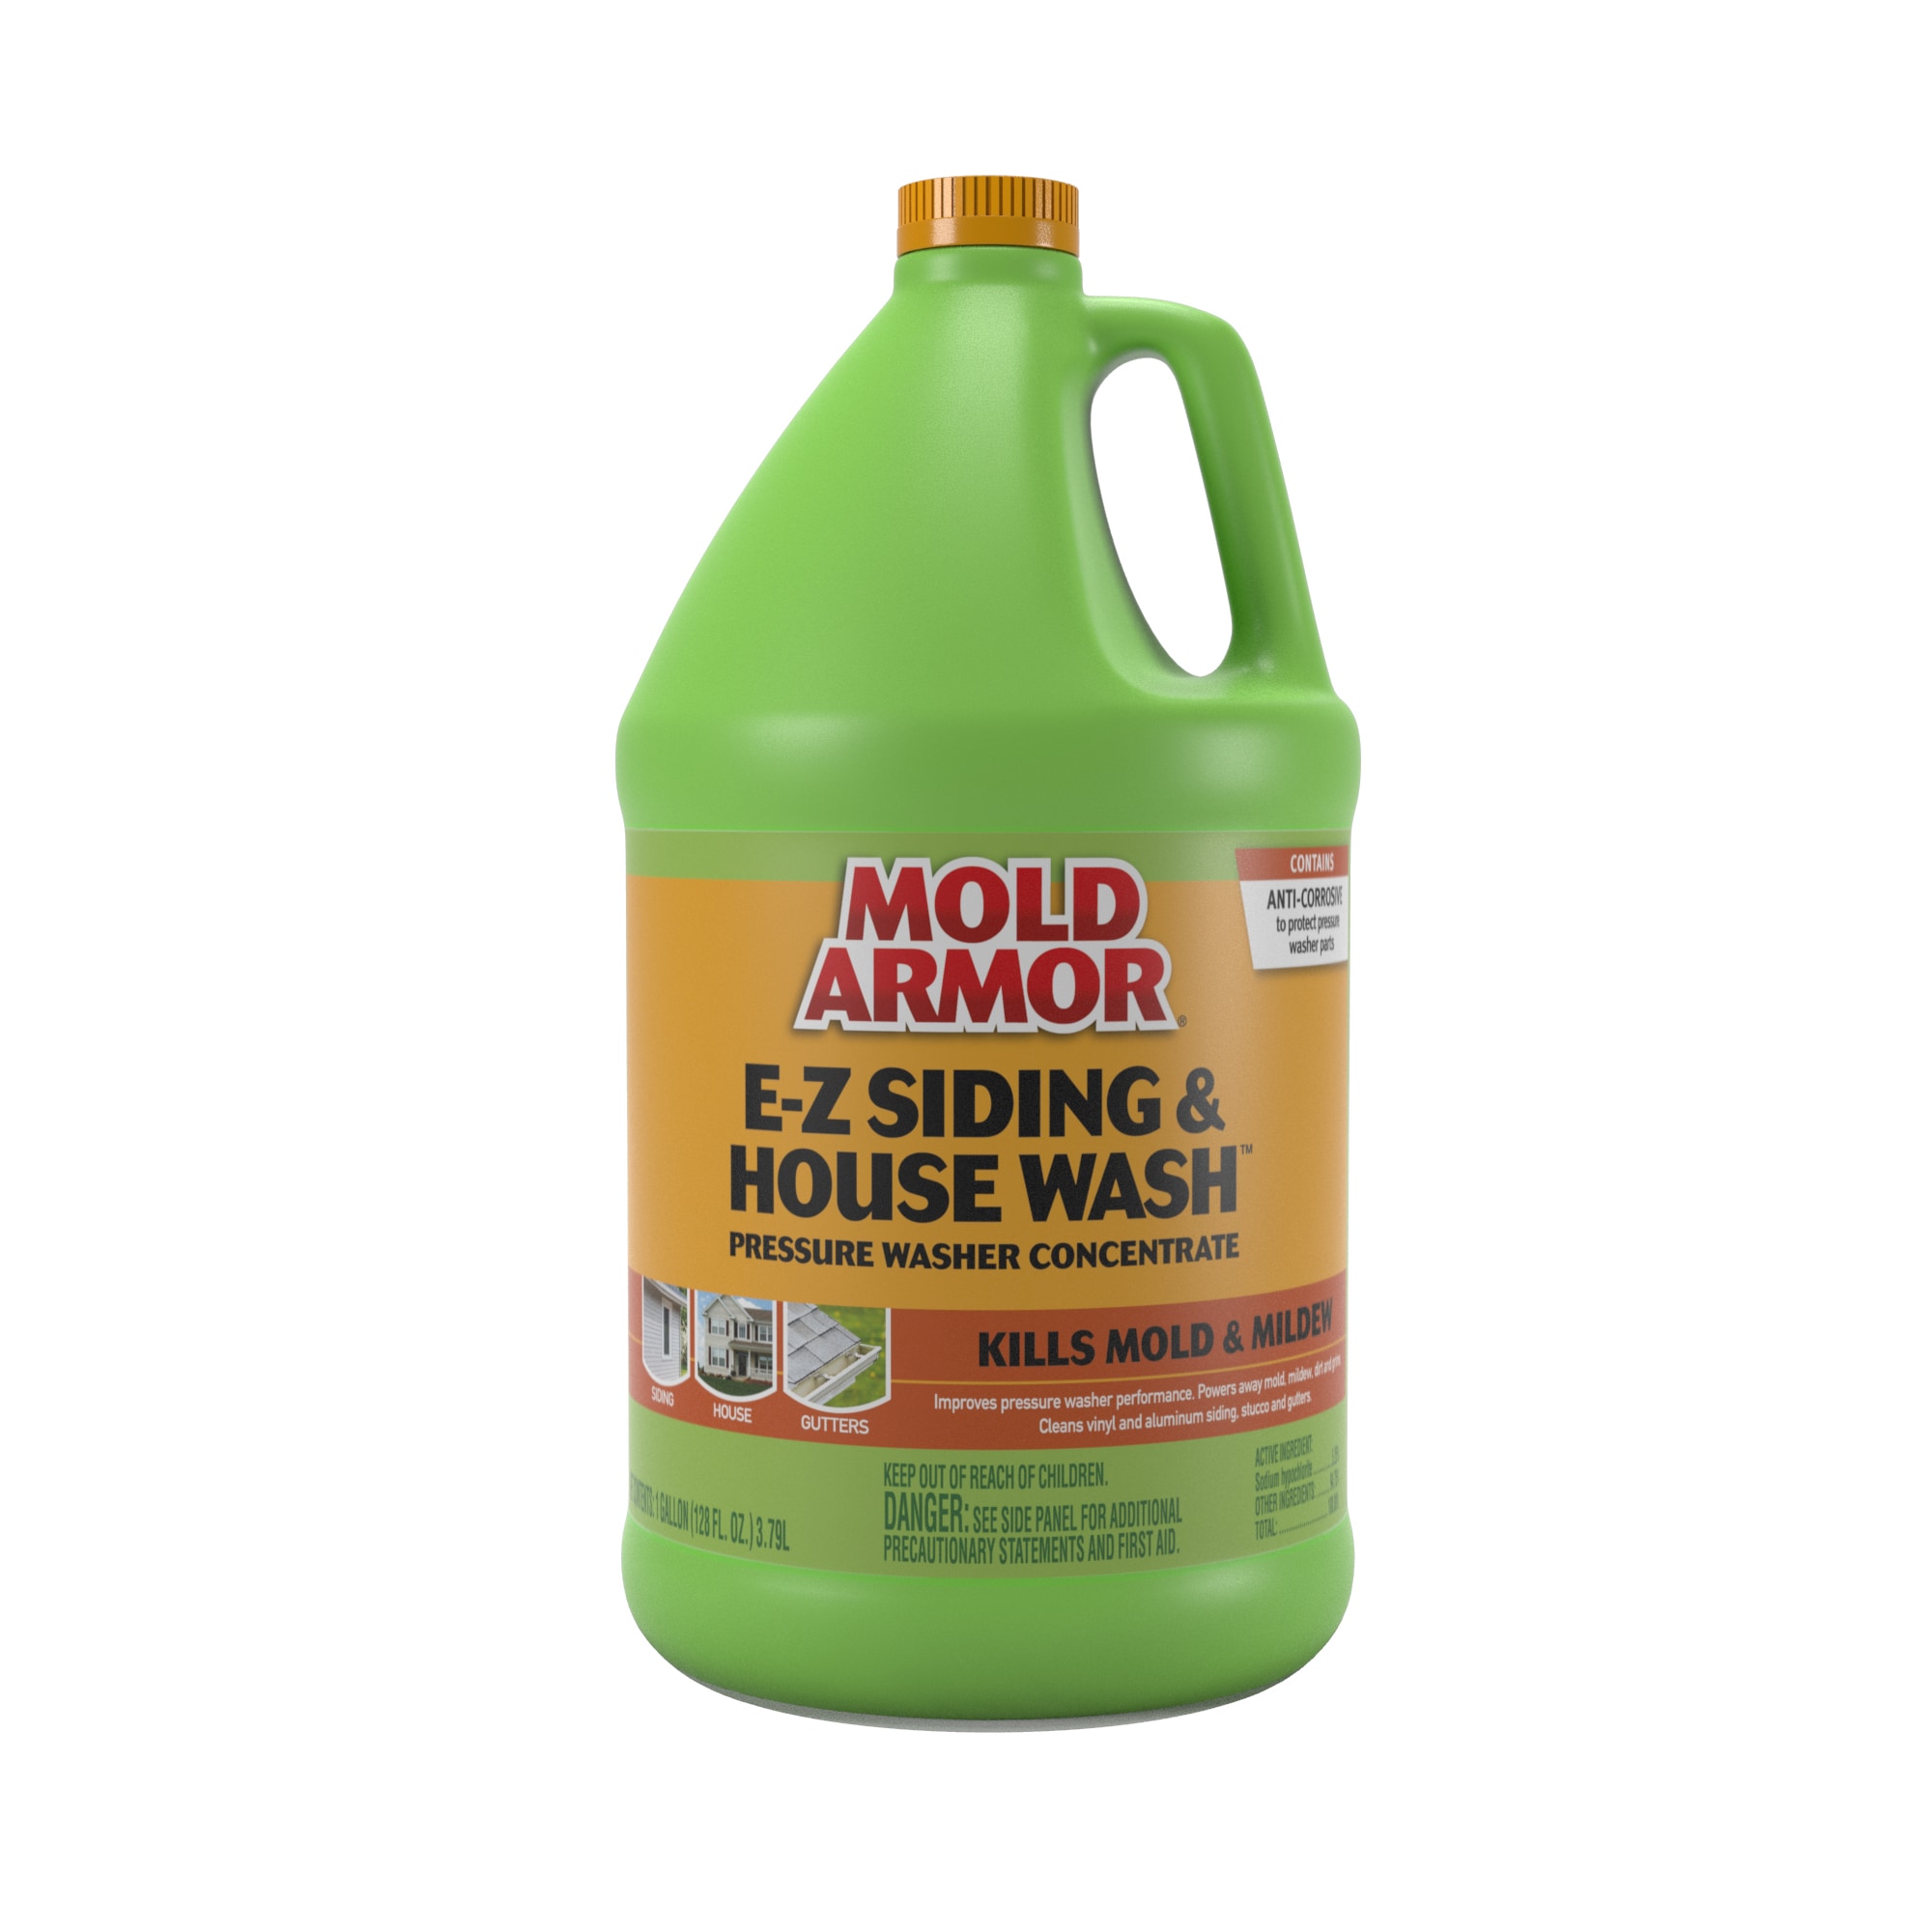 Slick Products Wash & Wash Foaming Cleaning Solution Motorcycle, Truck  64 Oz